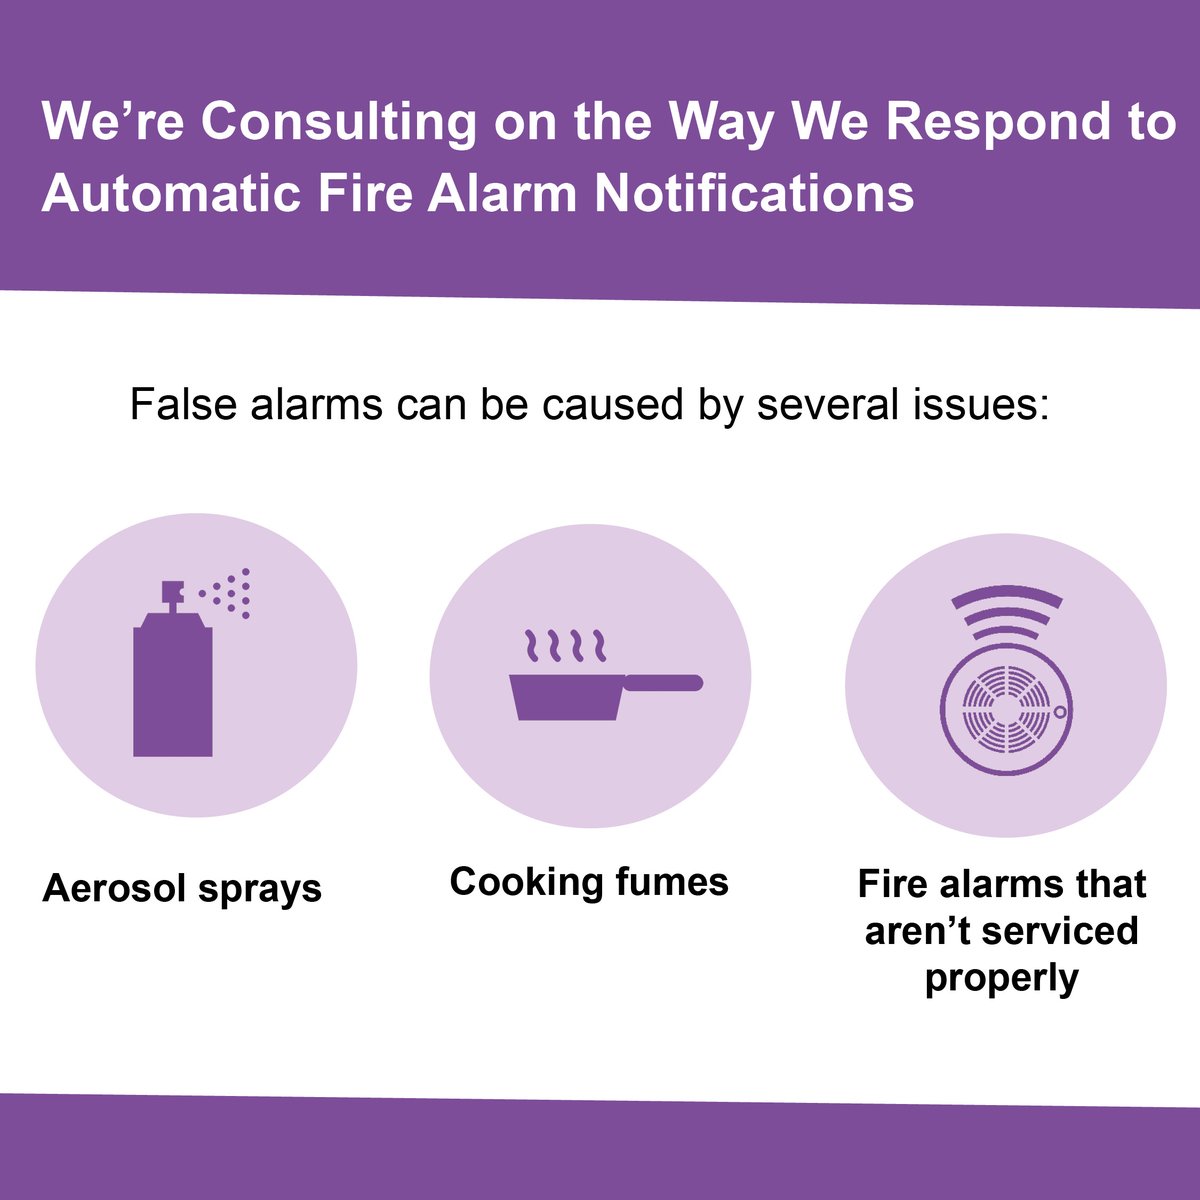 False alarms can be caused by several issues, for example, aerosol sprays, cooking fumes or a fire alarm system that hasn’t been serviced properly. We are consulting on proposals to change the way the Service responds to these types of calls. bit.ly/48weCNO